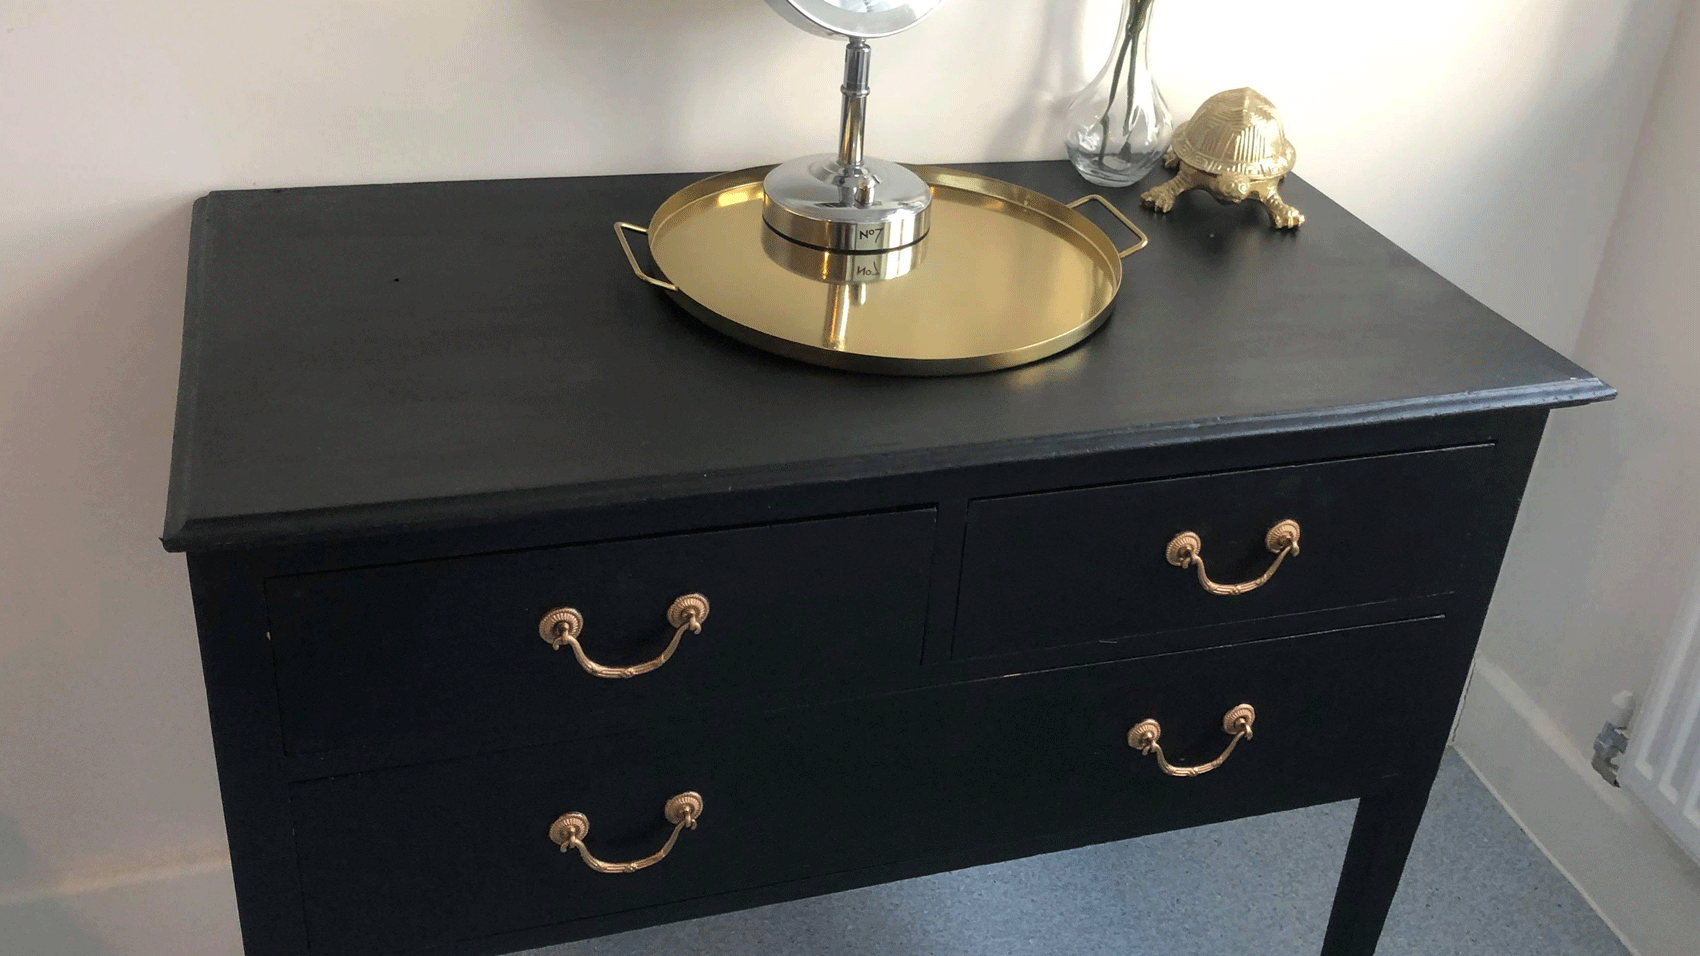 An upcycled Facebook marketplace freebie gets a new life as a chic side table